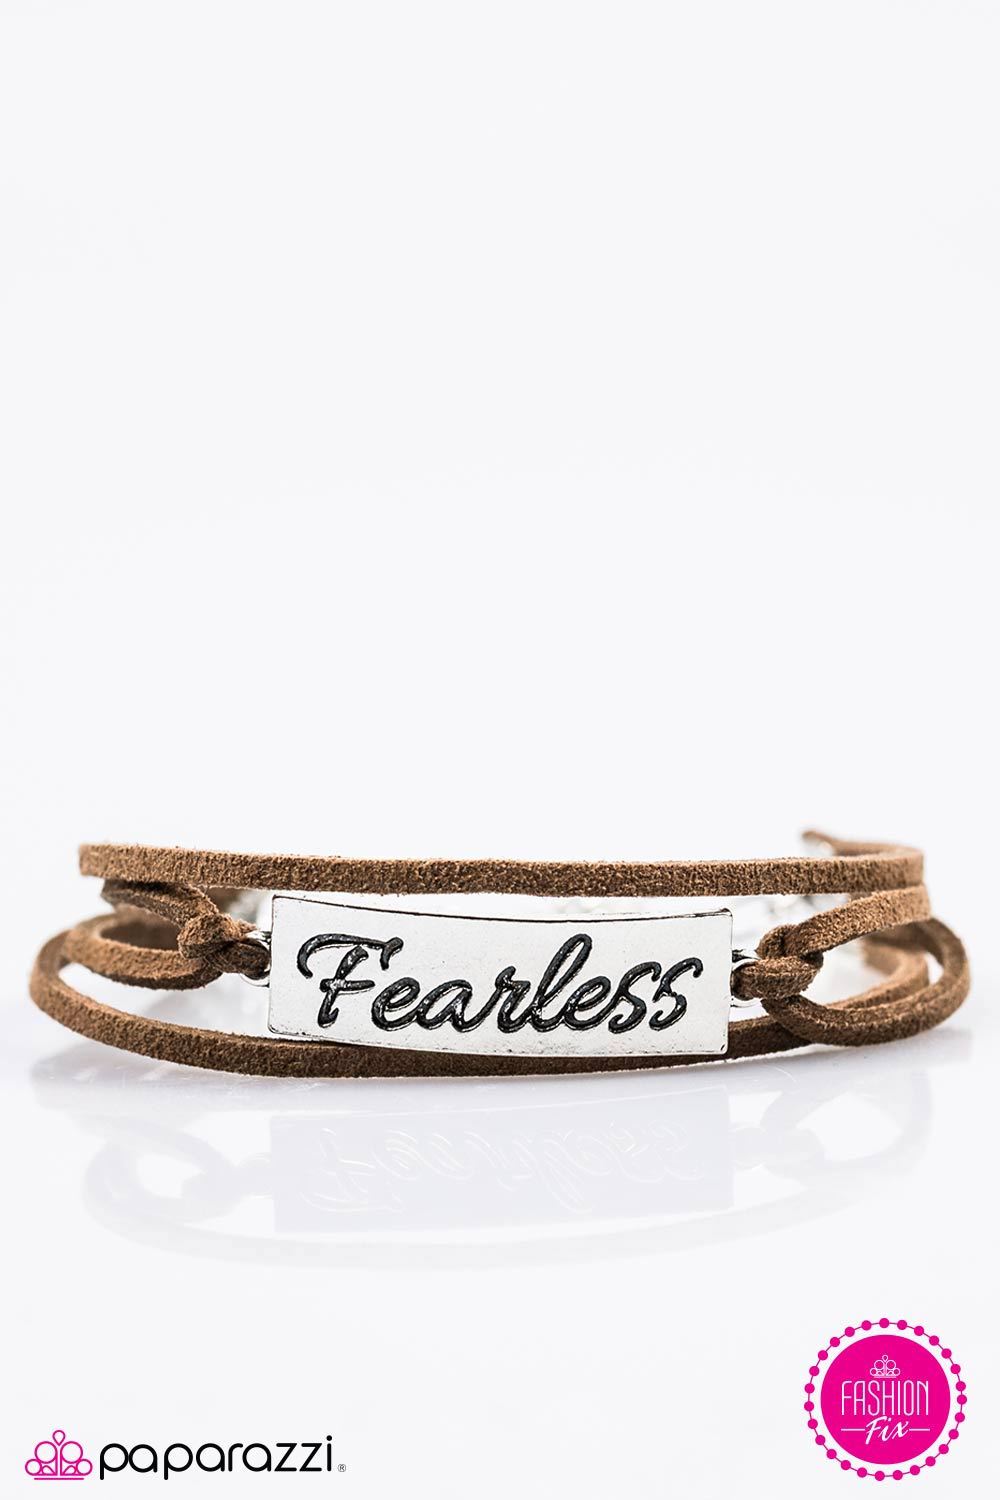 Fearless Brown Suede Inspirational Bracelet - Paparazzi Accessories-CarasShop.com - $5 Jewelry by Cara Jewels